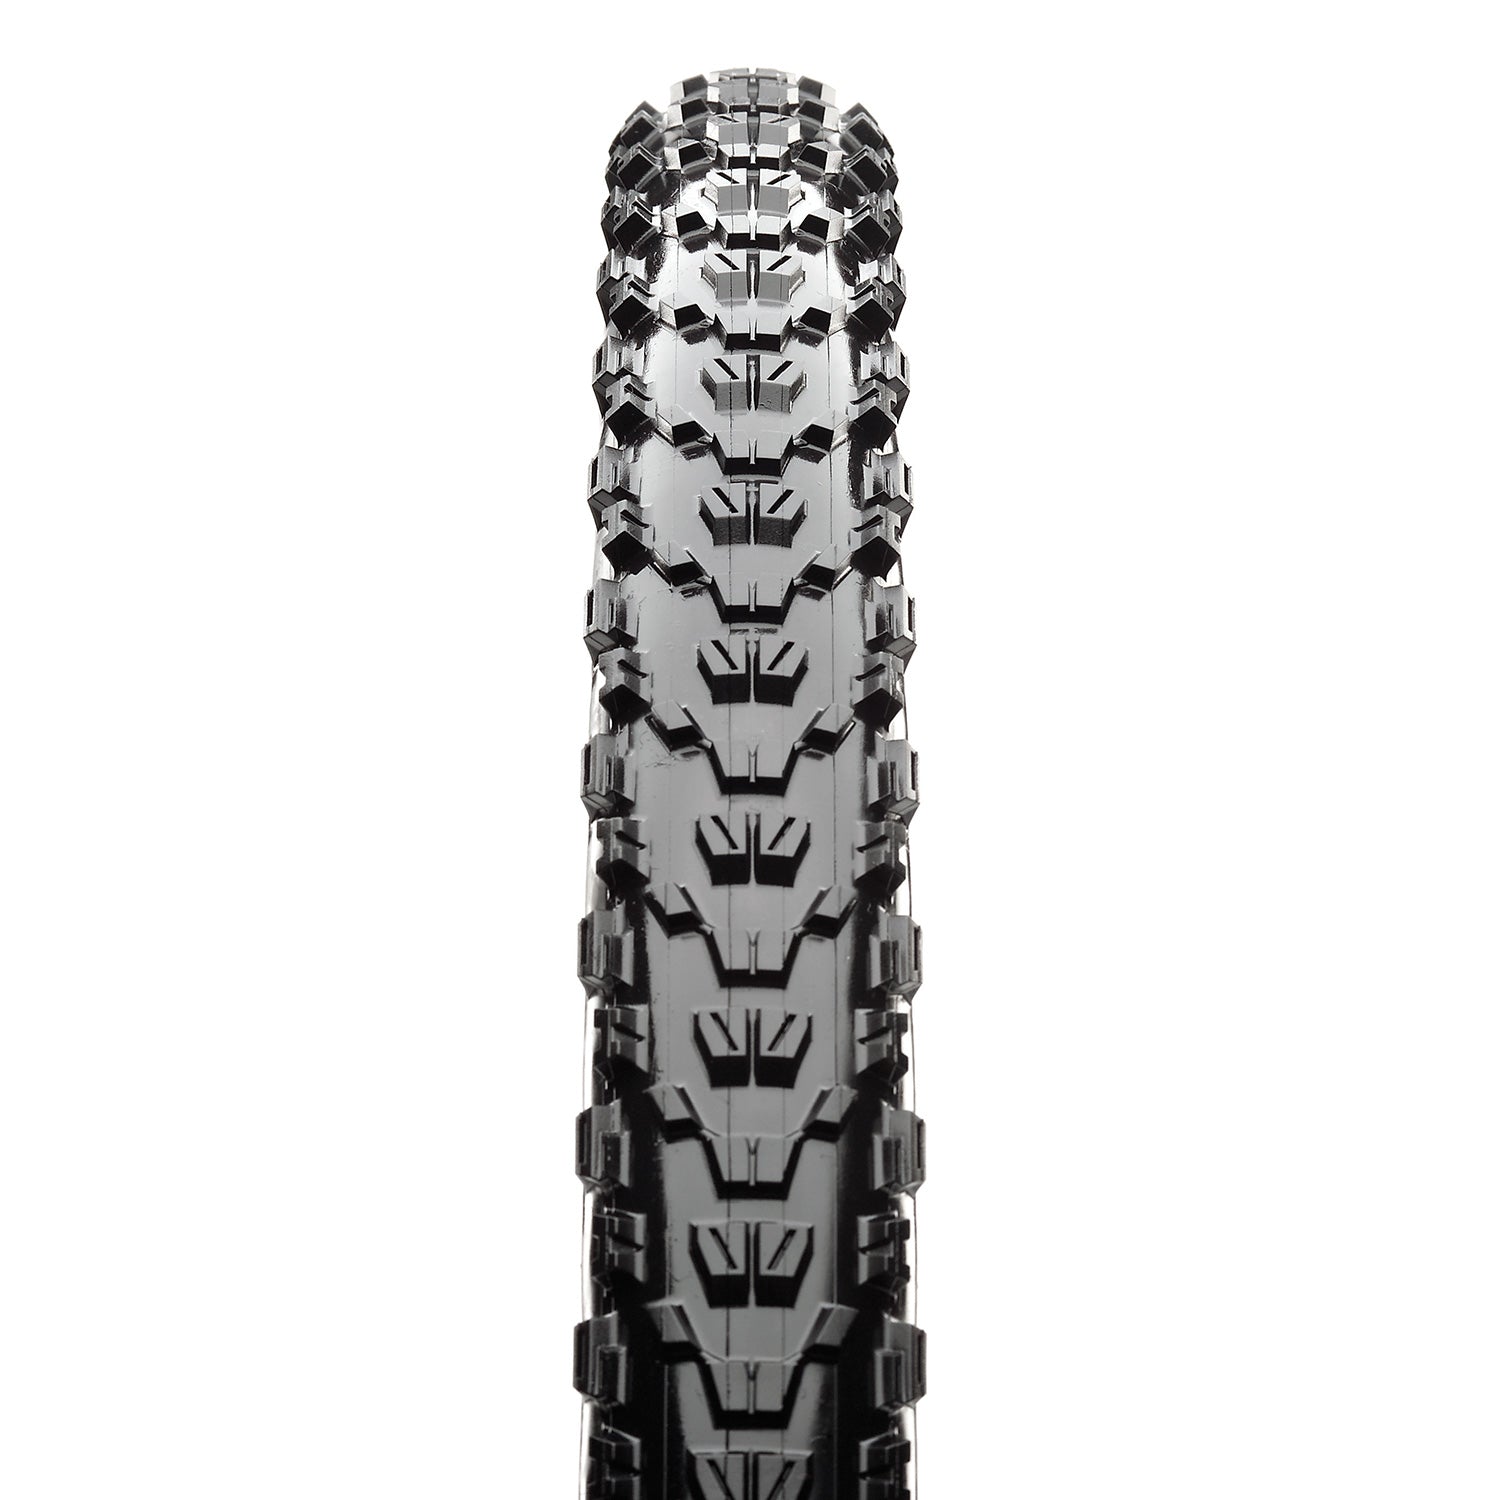 Maxxis Ardent Tire - The PM Cycles - Singapore | Fidlock - Forbidden Bike 